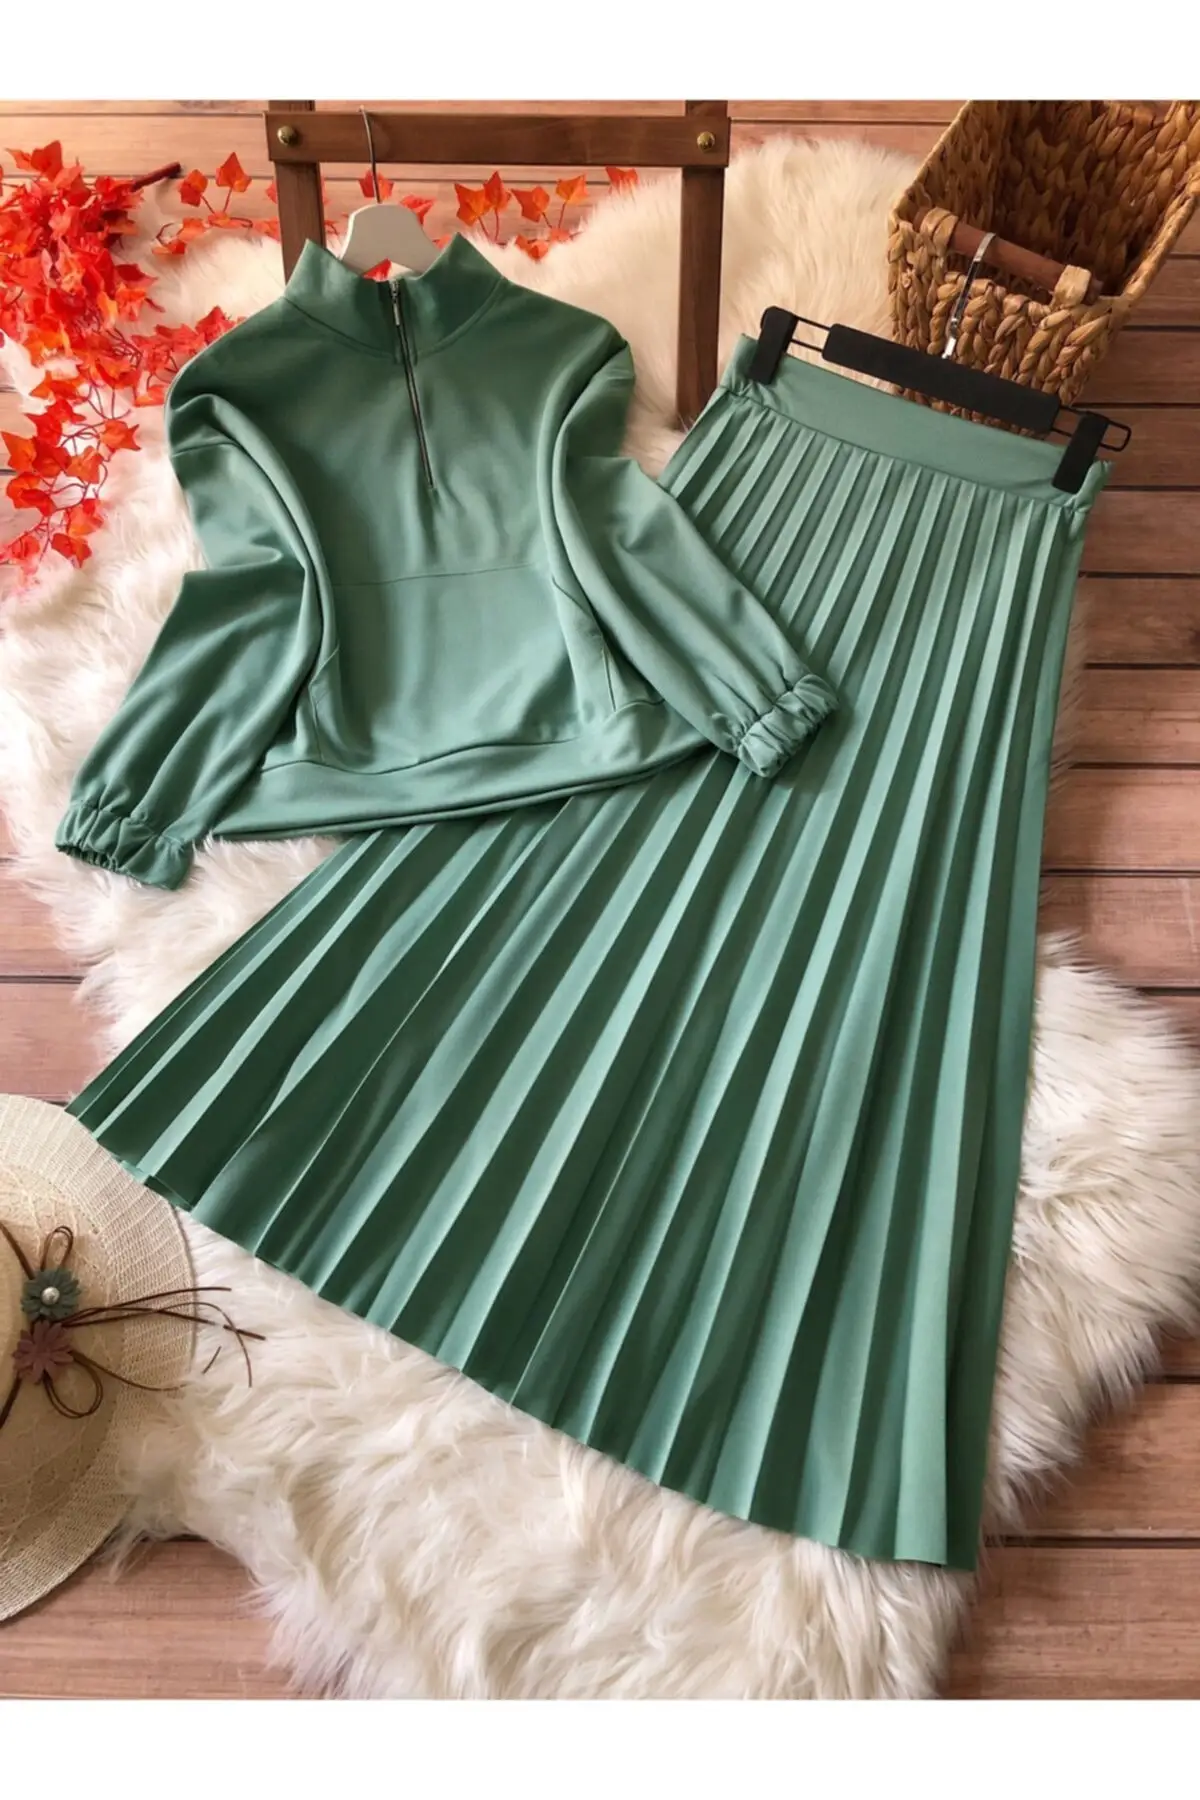 Pilise Skirted Zipper Suit Solid Color Polyester Trend Green Long Piliseli Crepe 2 Hijab Bottom-Top Suits Clothing